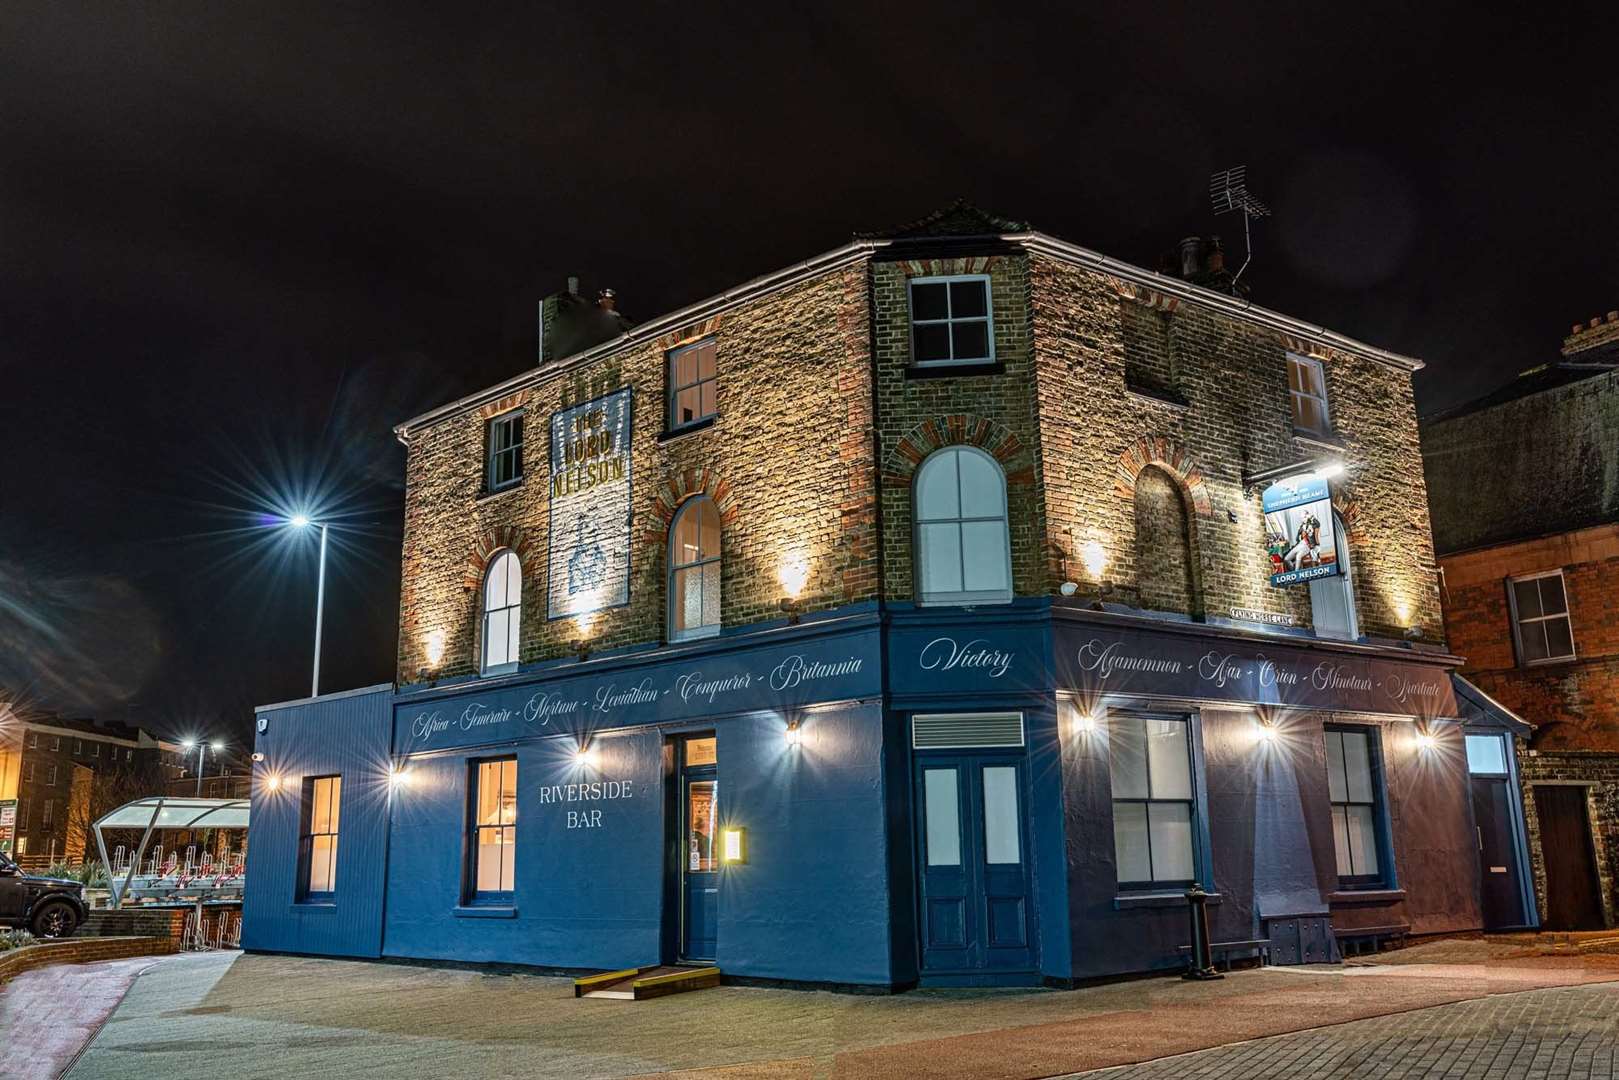 The Lord Nelson has undergone a £330,000 refurb